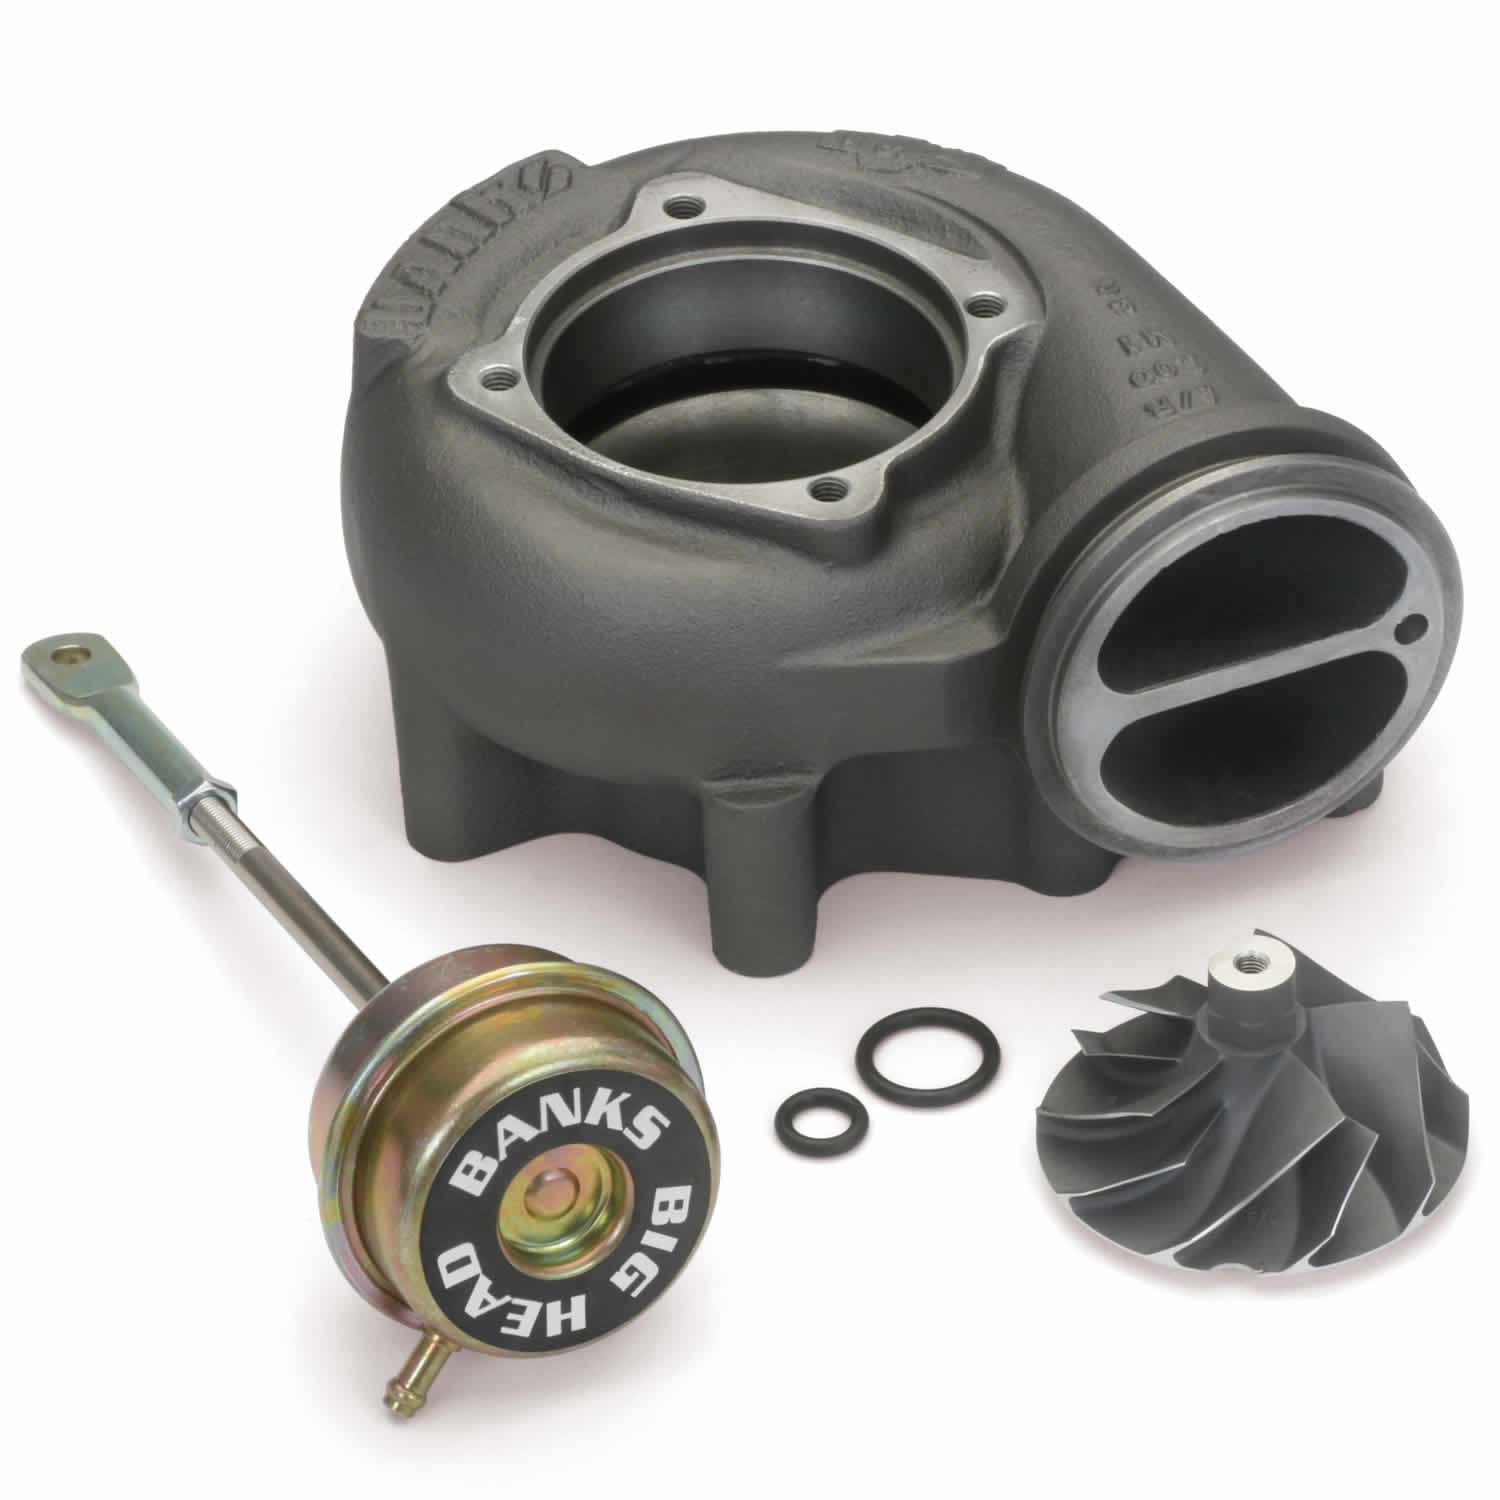 Turbo Upgrade Kit for 1999-2003 Ford Excursion 7.3L/1999-2003